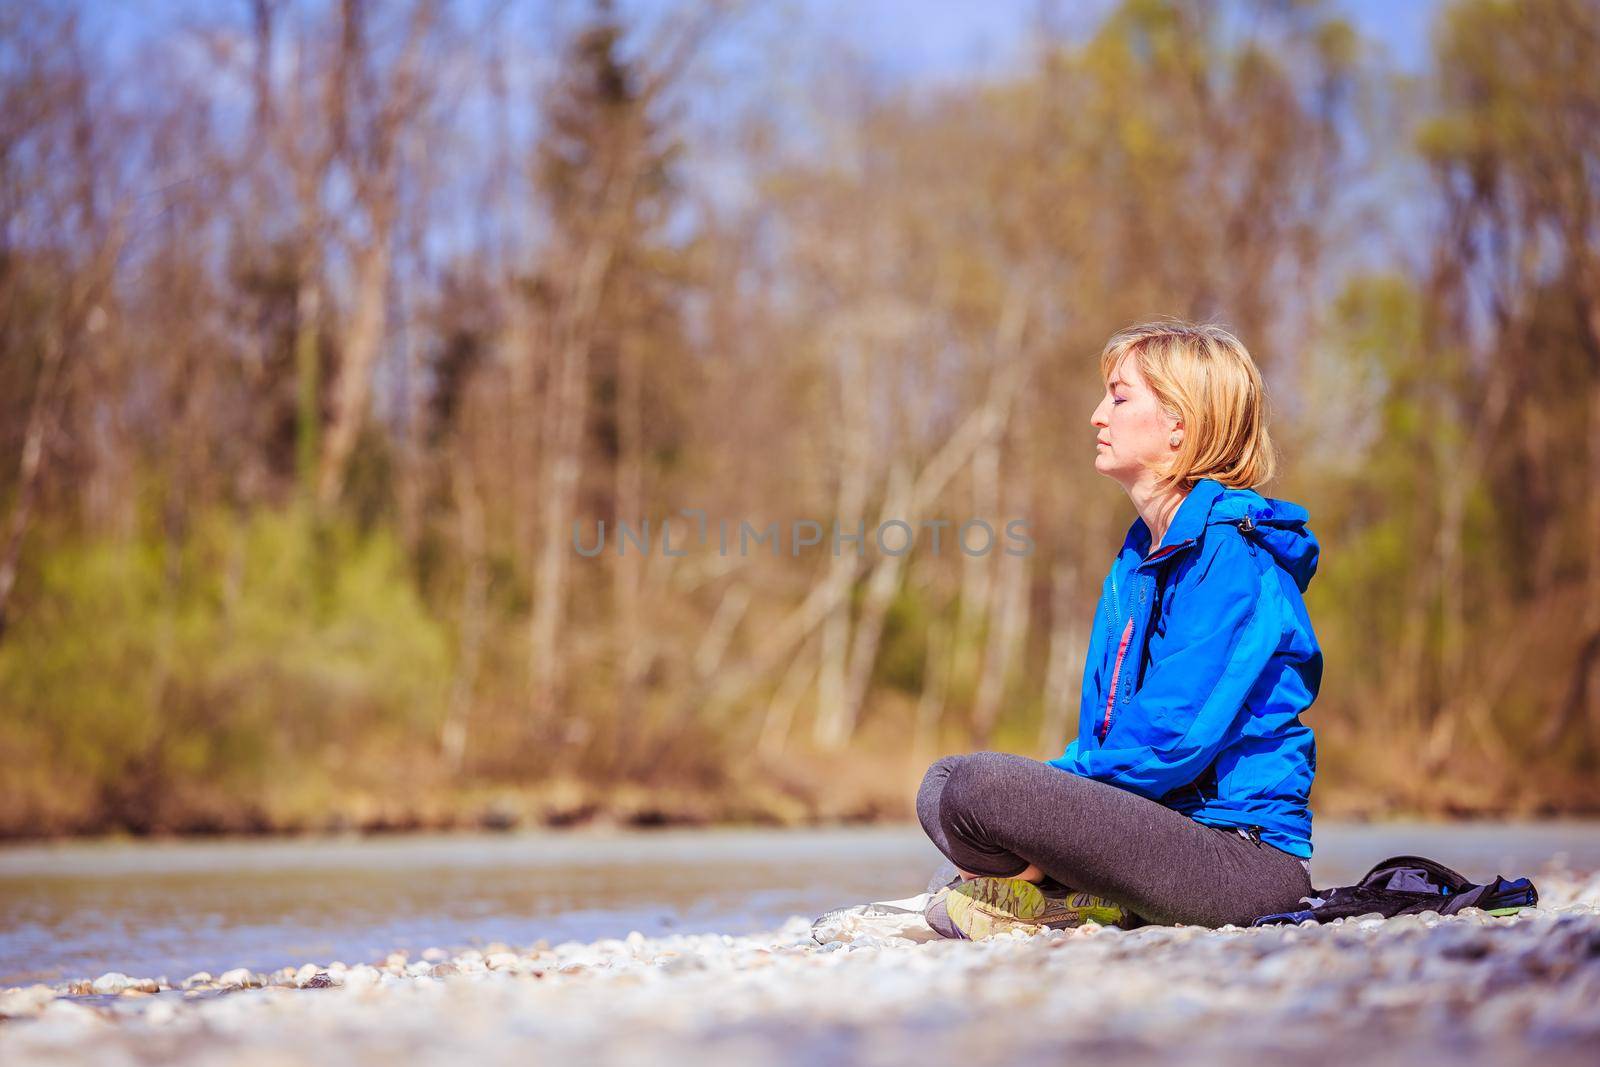 Meditation and relaxation: Woman is meditating outdoors on a pebble beach. Enjoying the summer. by Daxenbichler